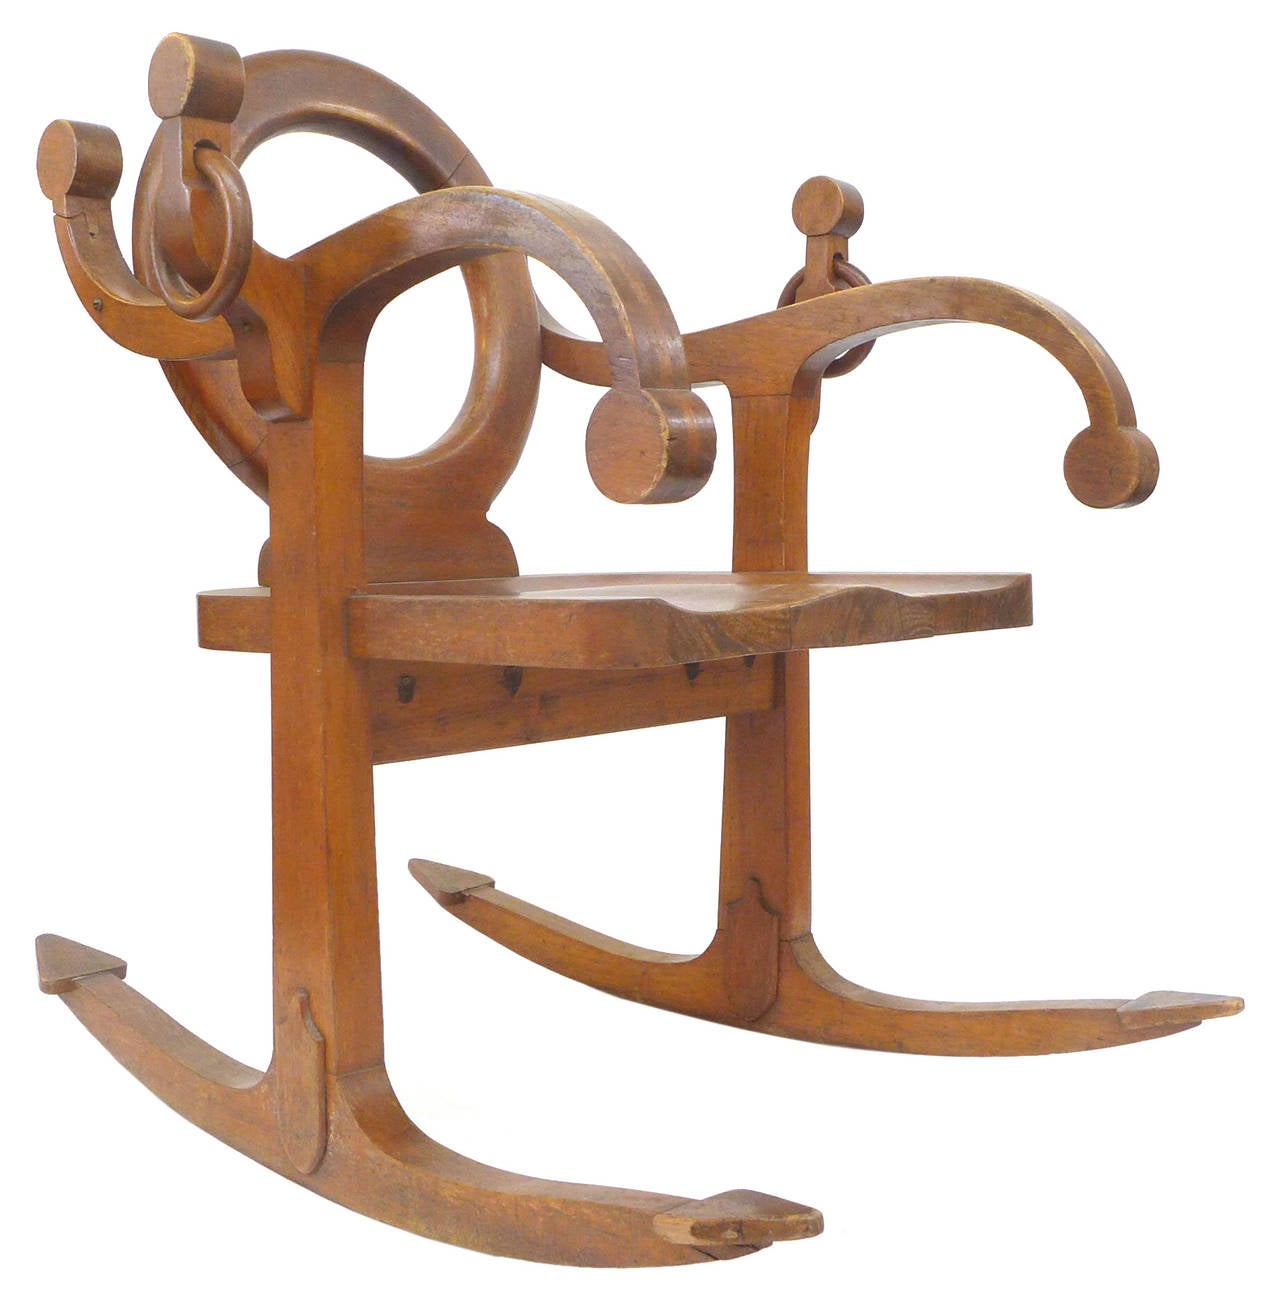 A wonderfully unusual rocking chair playfully utilizing the form of a ship's anchor. Elegant and surreal with figural, nautical elements throughout, including anchor-arms and flukes for rocking rails, hanging ring handles, alternately twisting stock